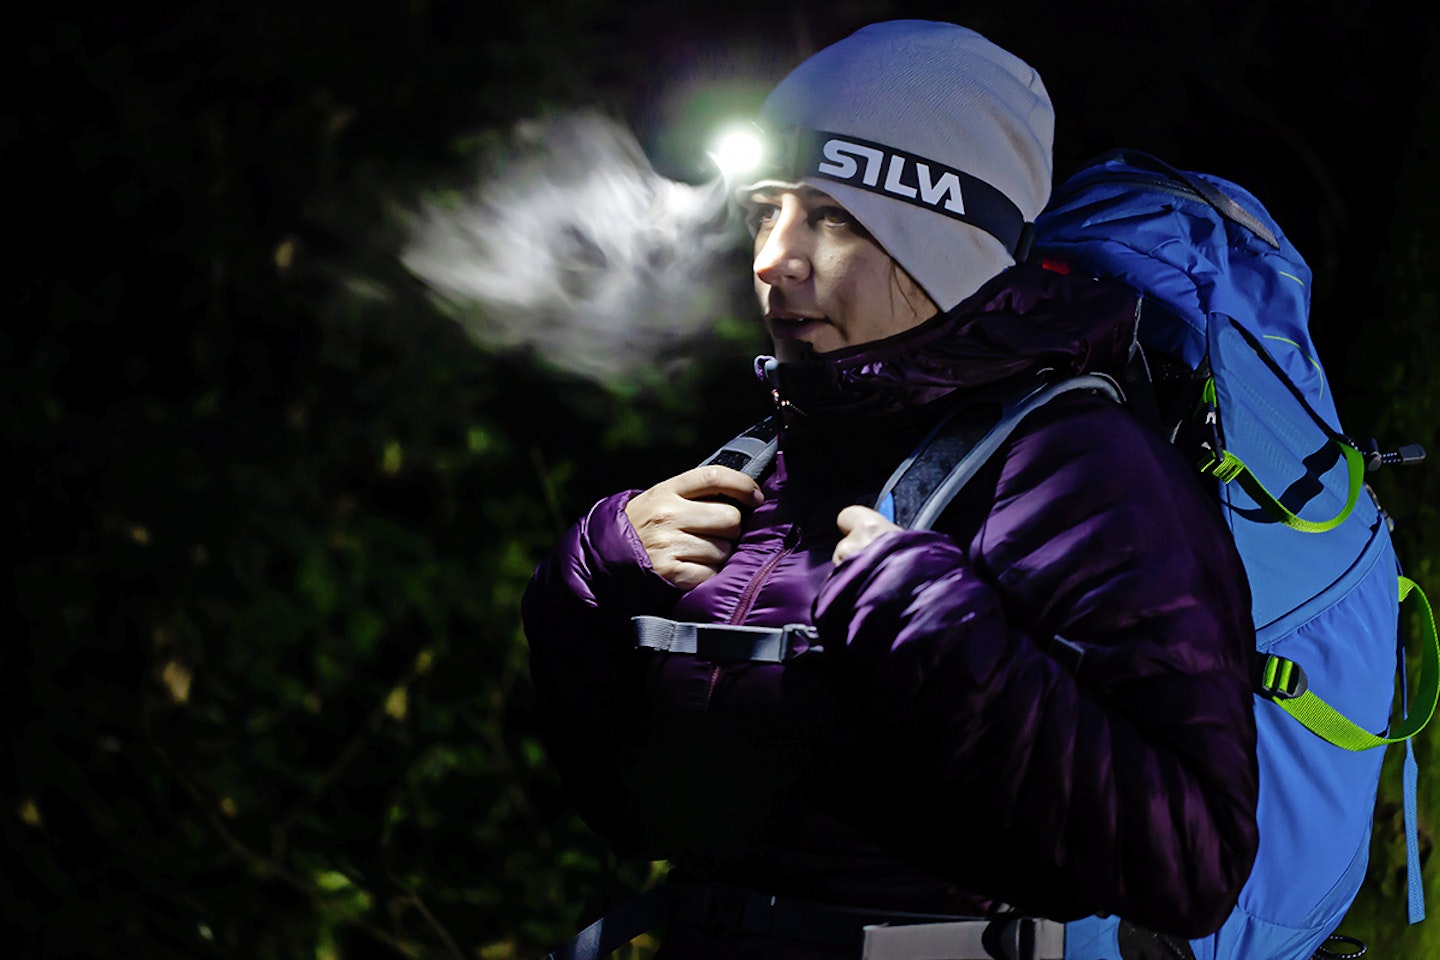 woman in hiking gear and hat and rucksack in dark with head torch illuminating her breath